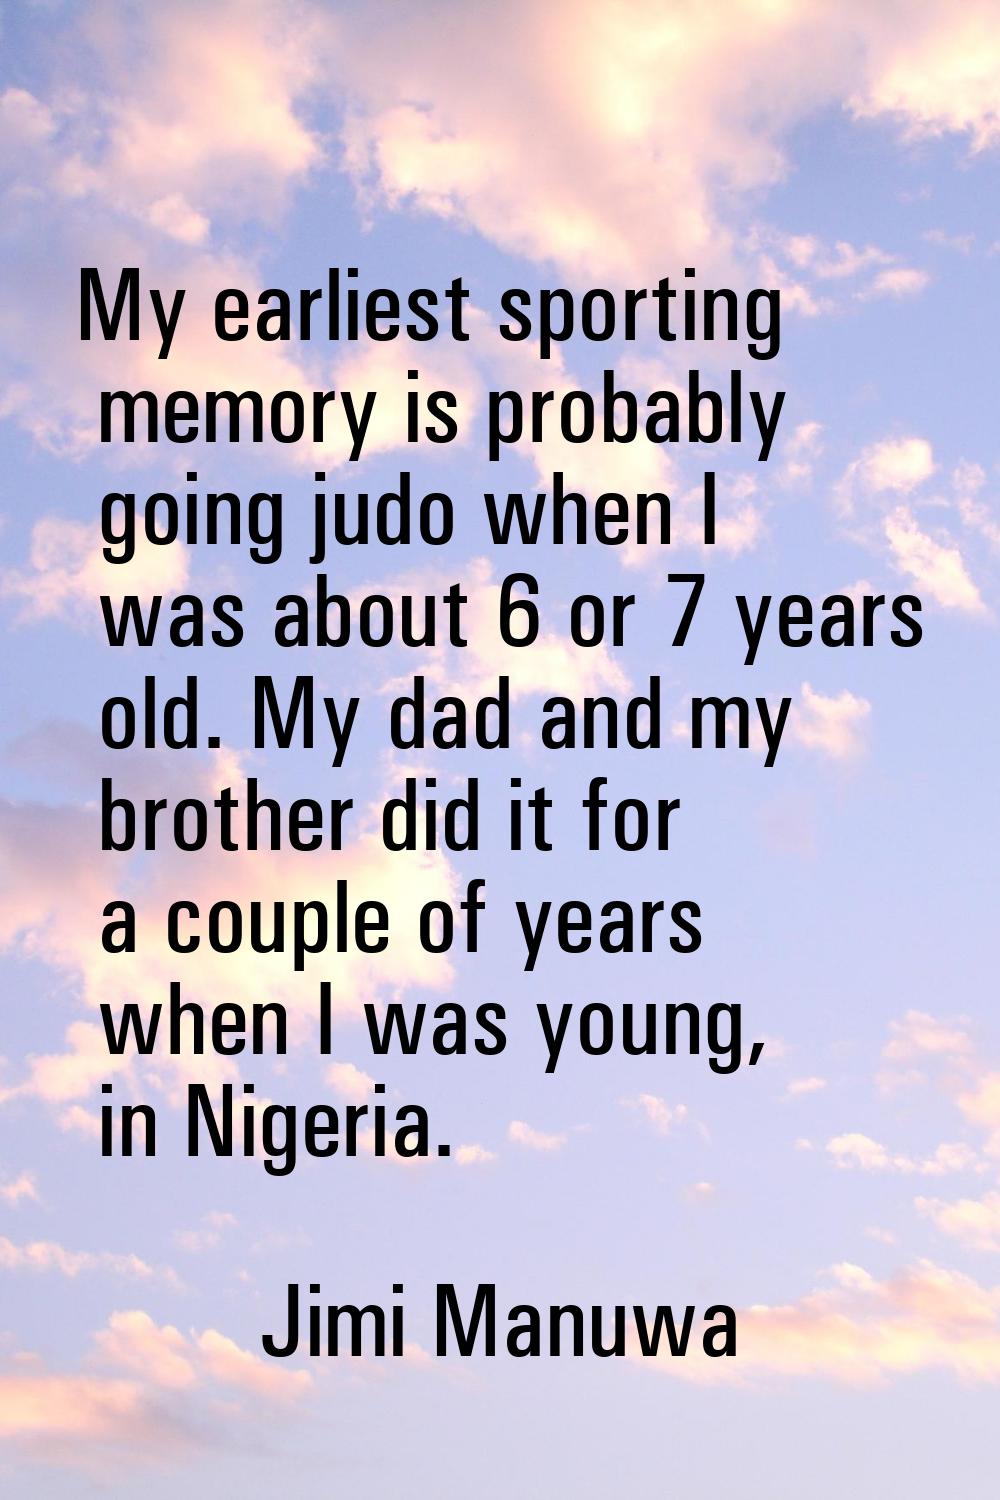 My earliest sporting memory is probably going judo when I was about 6 or 7 years old. My dad and my